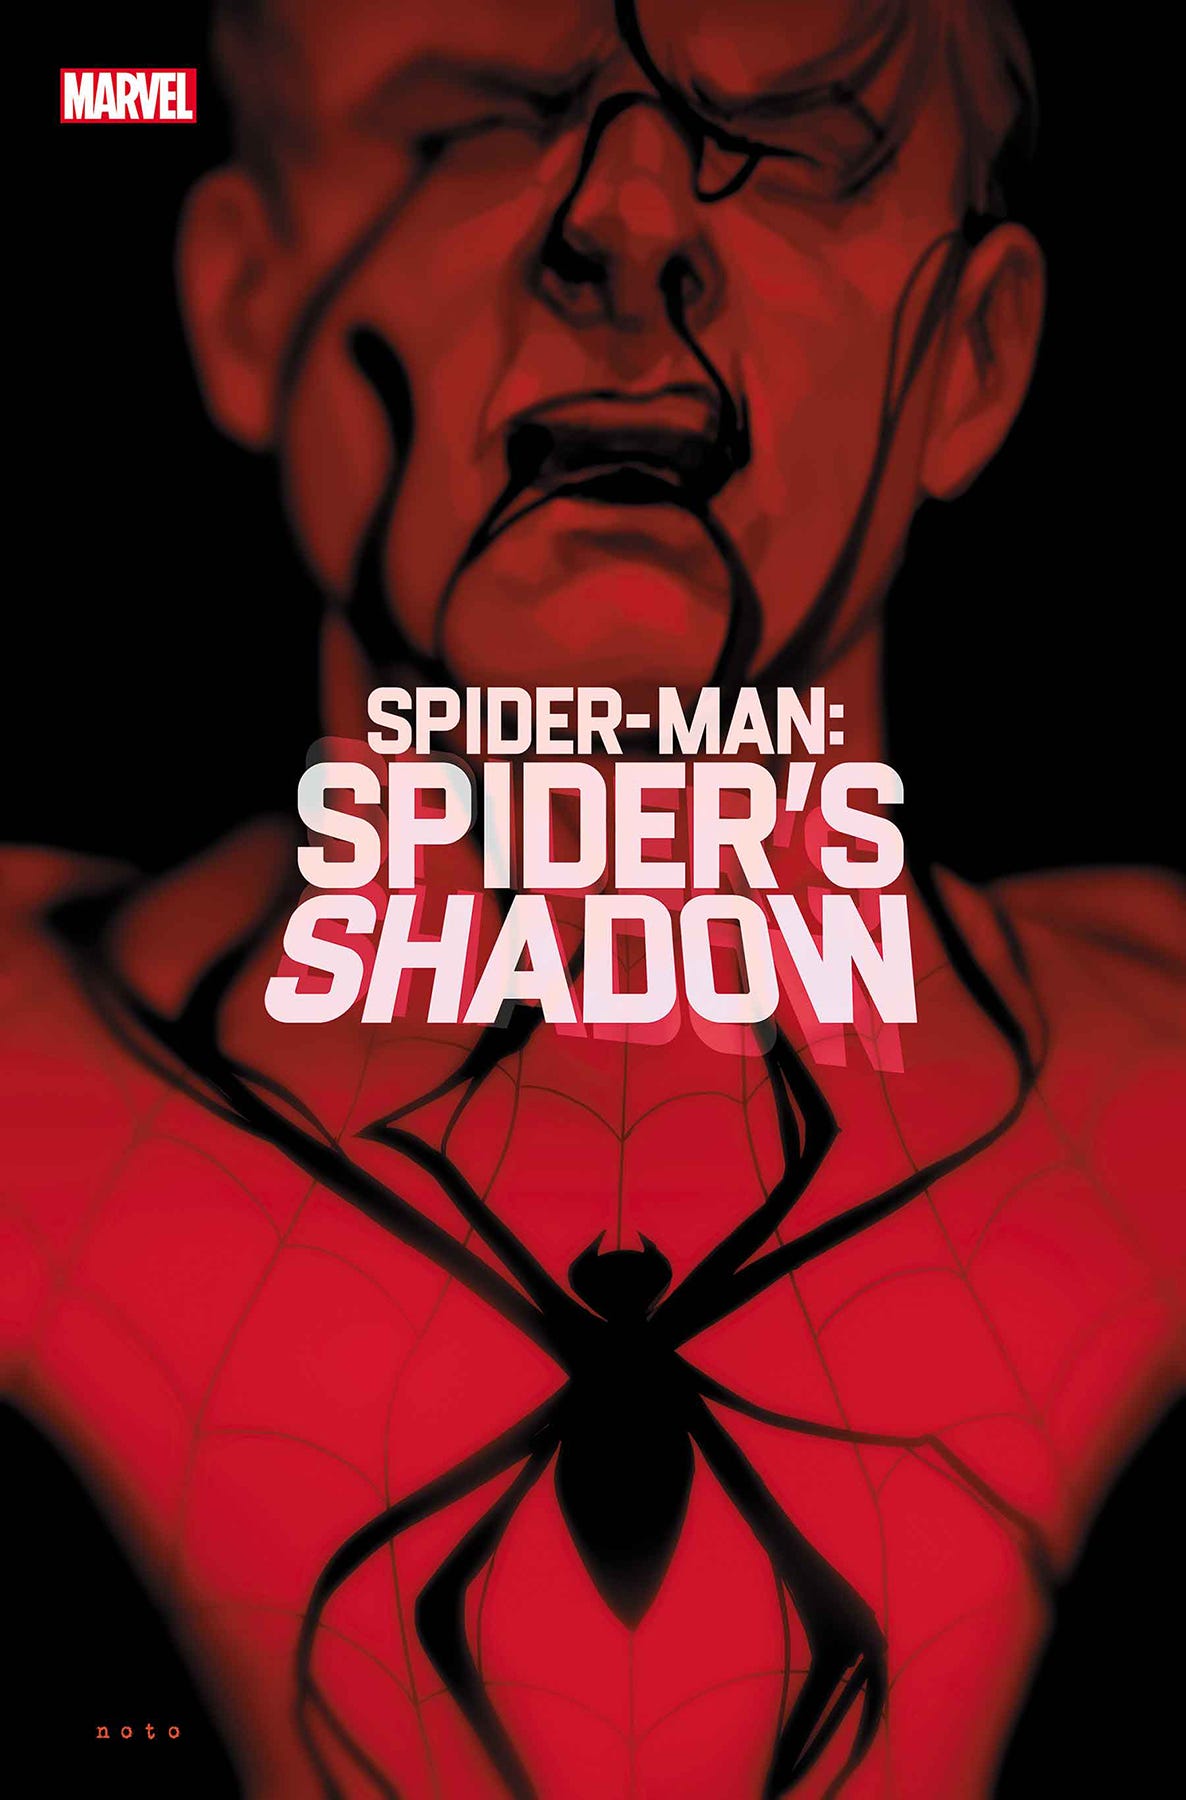 Spider-Man Spiders Shadow #1 (of 4)